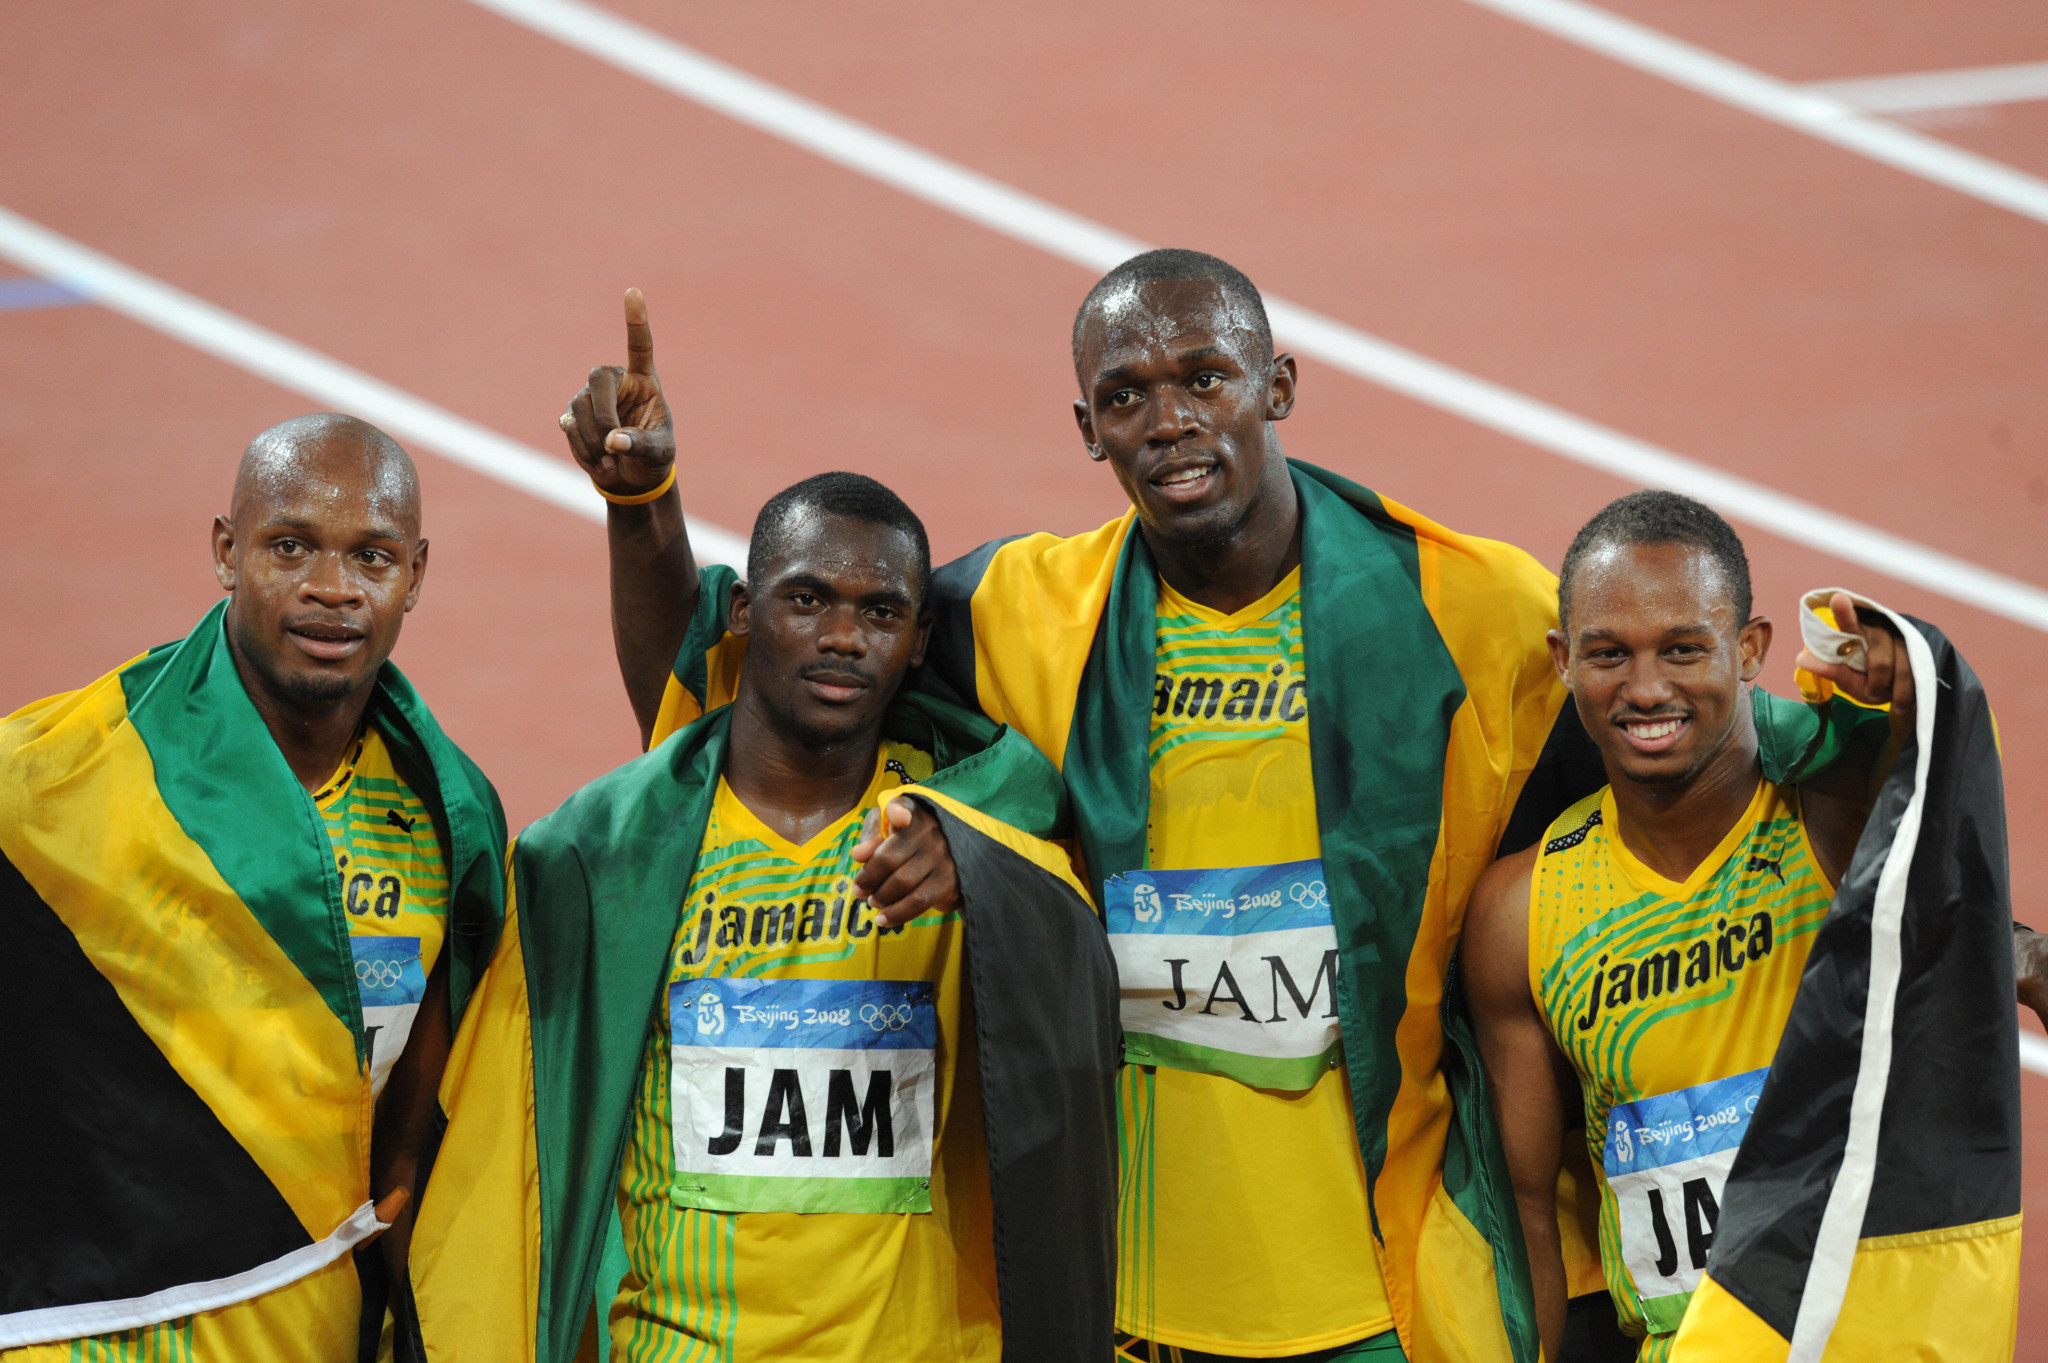 From left to right, Asafa Powell, Nesta Carter, Usain Bolt and Michael Frater, celebrate their 4x100m gold medal at the Beijing 2008 Olympics ©Getty Images